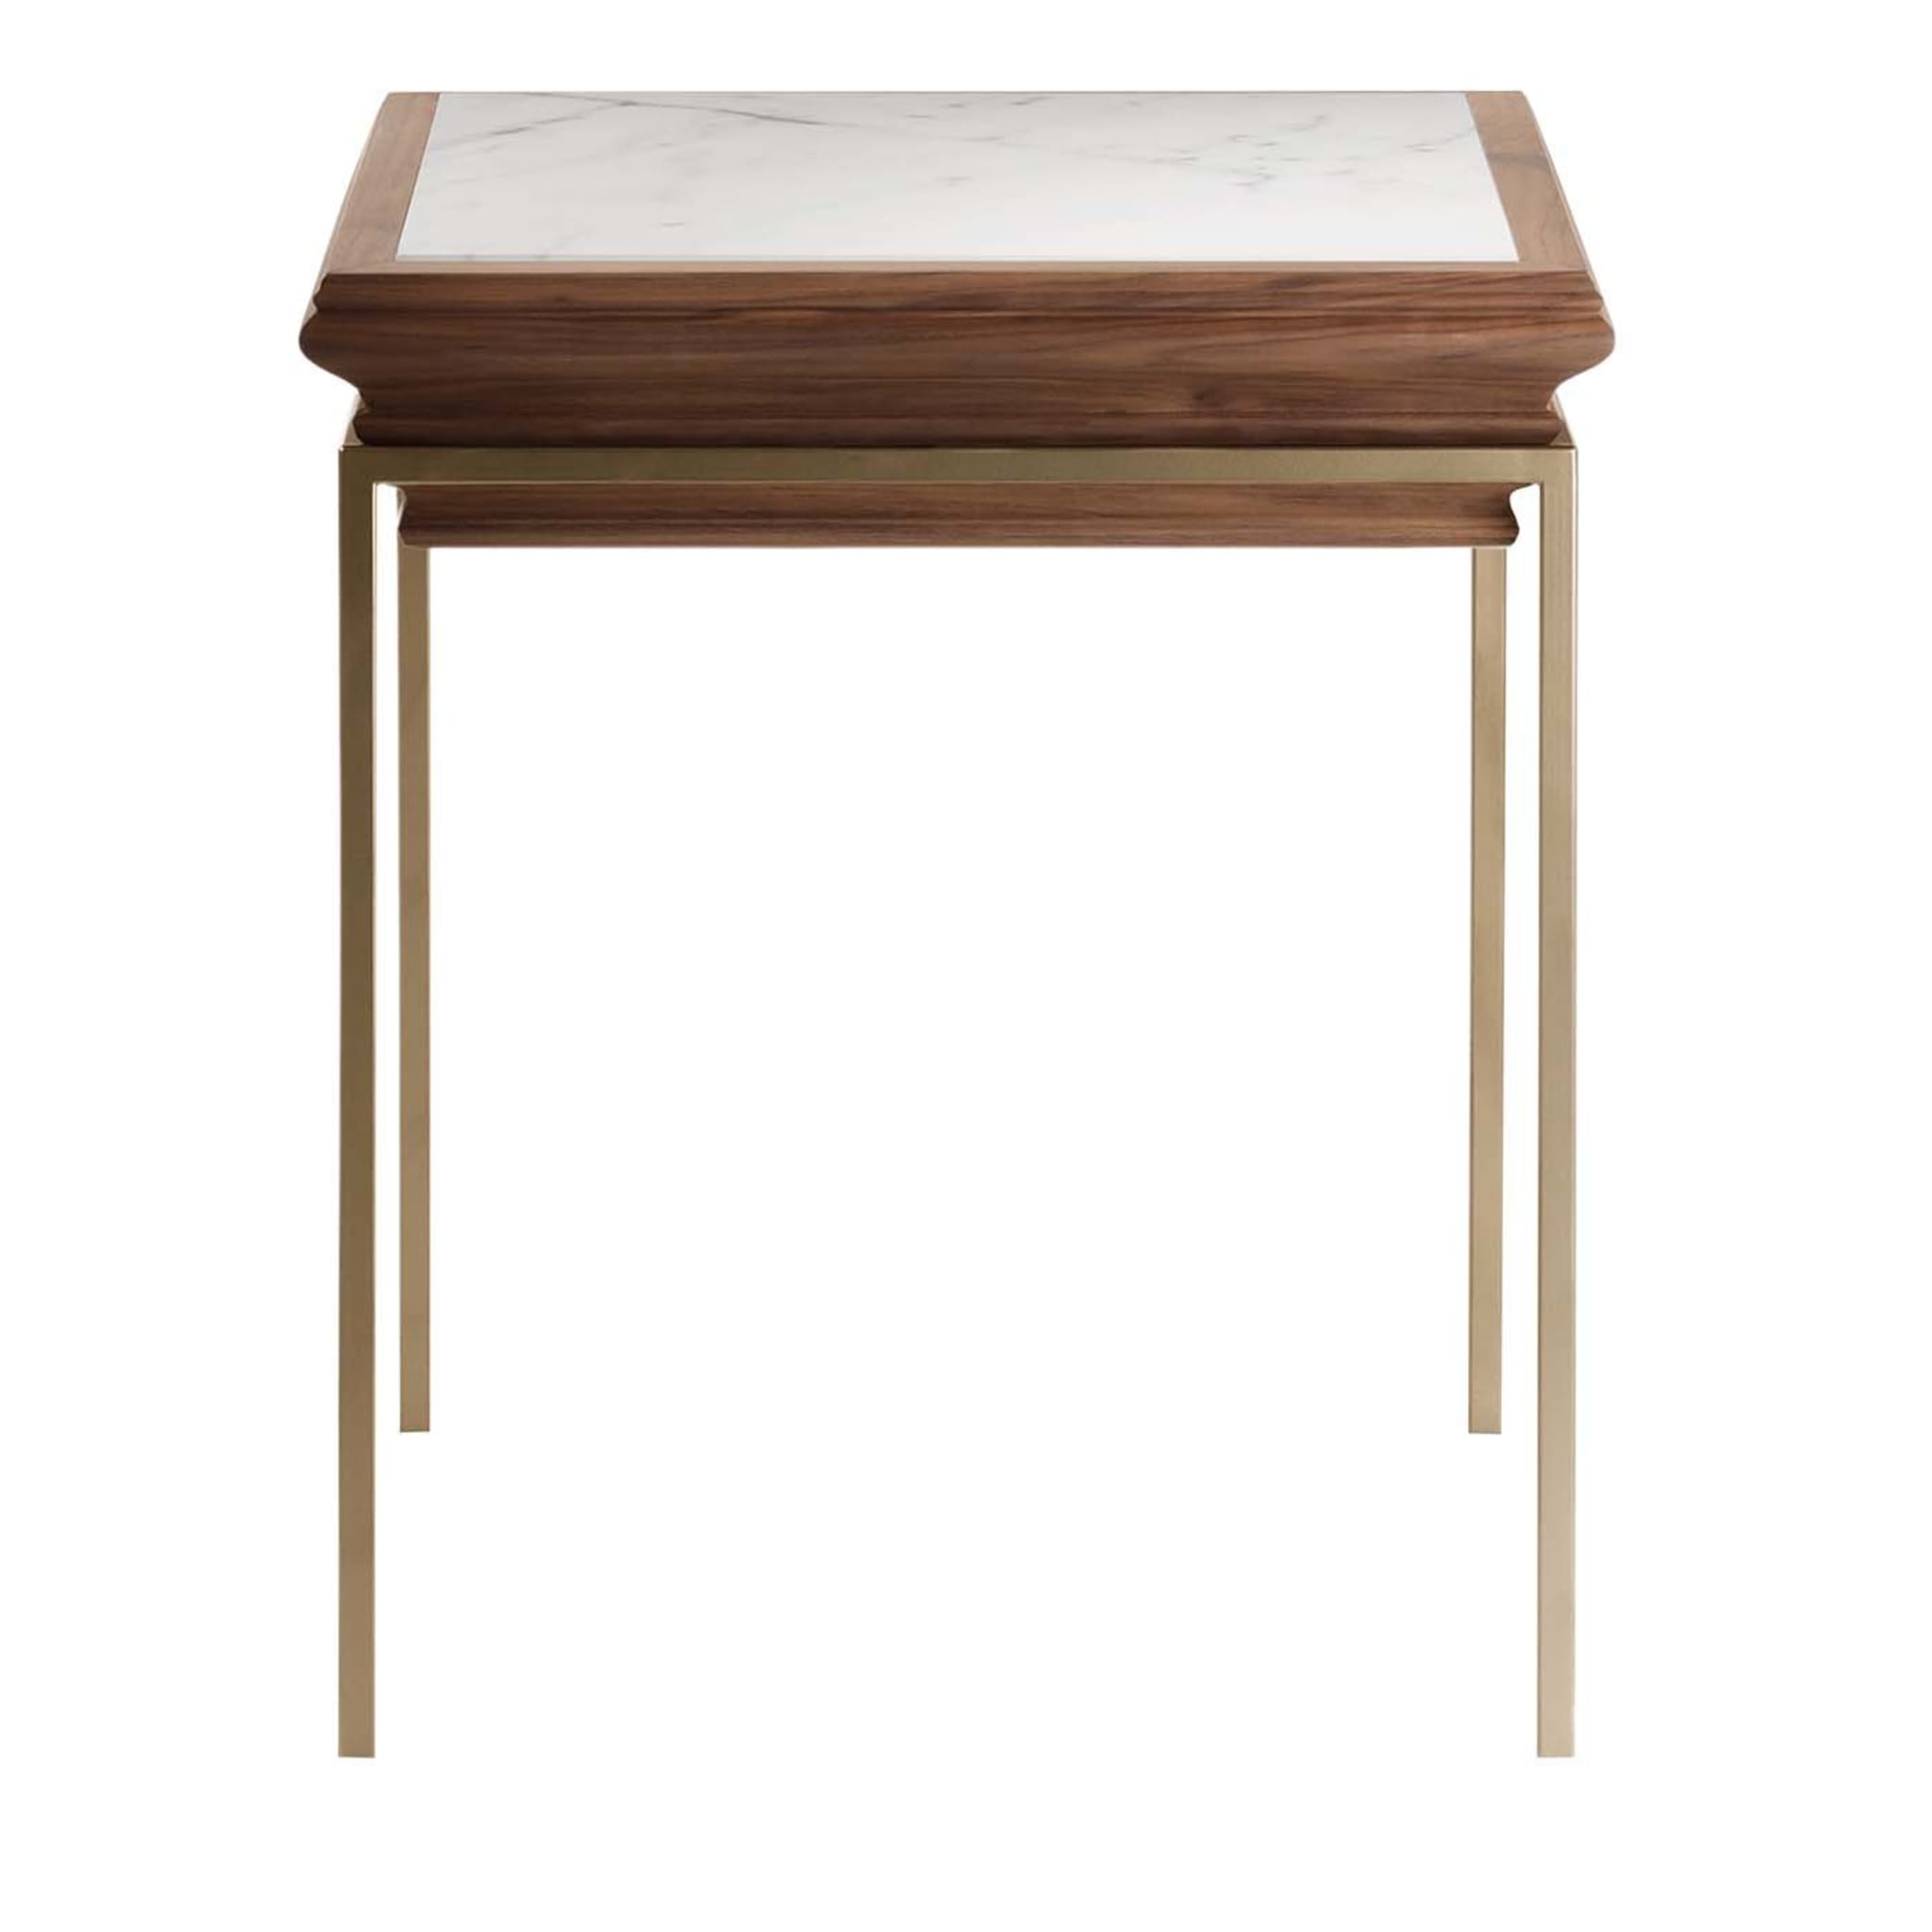 Abaco Side Table with Marble Top by Dell’Aglio/Migliore  - Main view